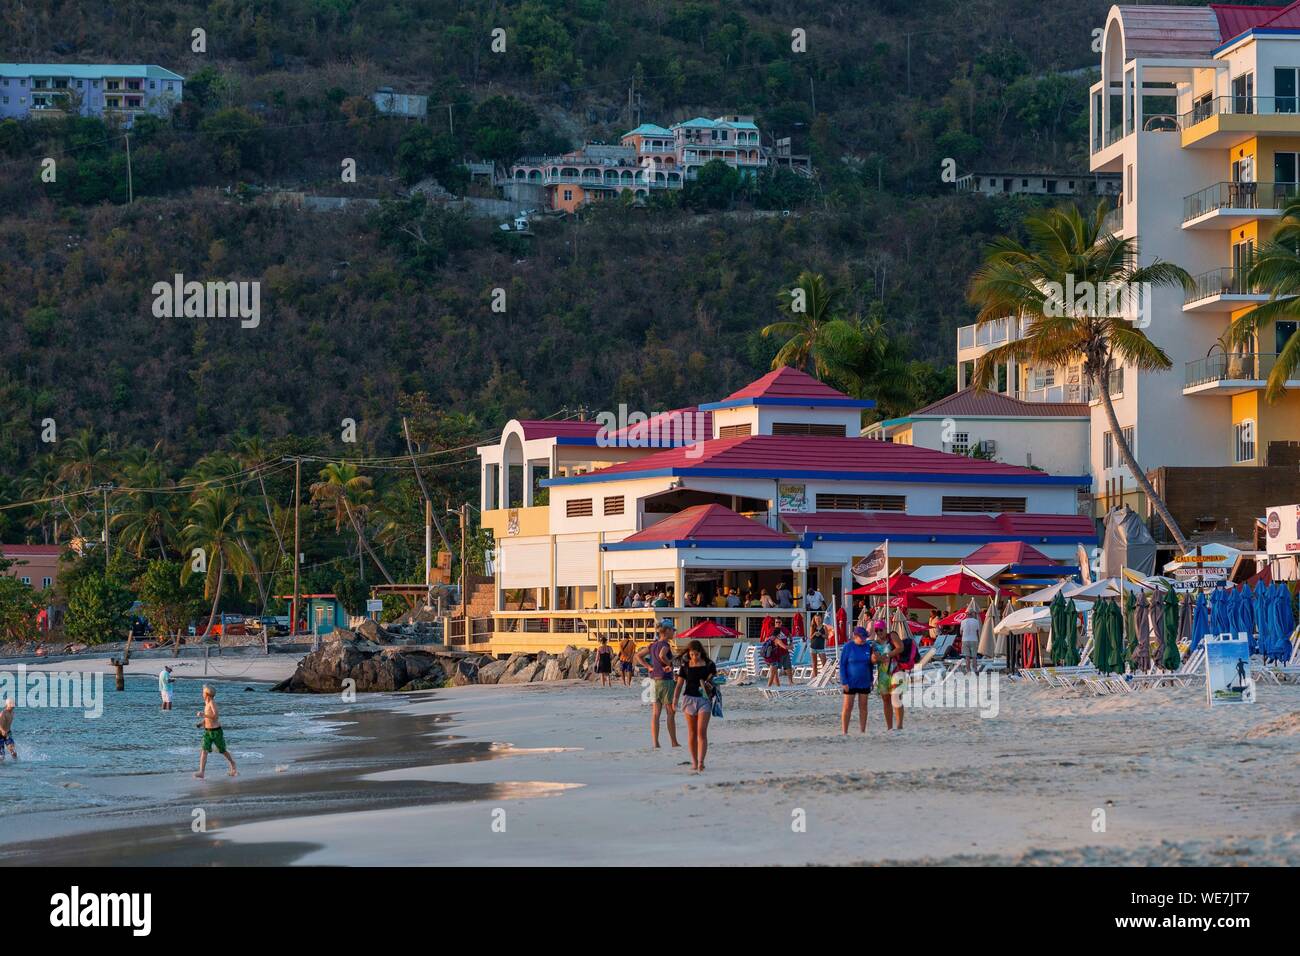 West Indies, British Virgin Islands, Tortola Island, on Cane Garden Bay's last end-of-day bathing beach, in the background the famous Quitos bar Stock Photo